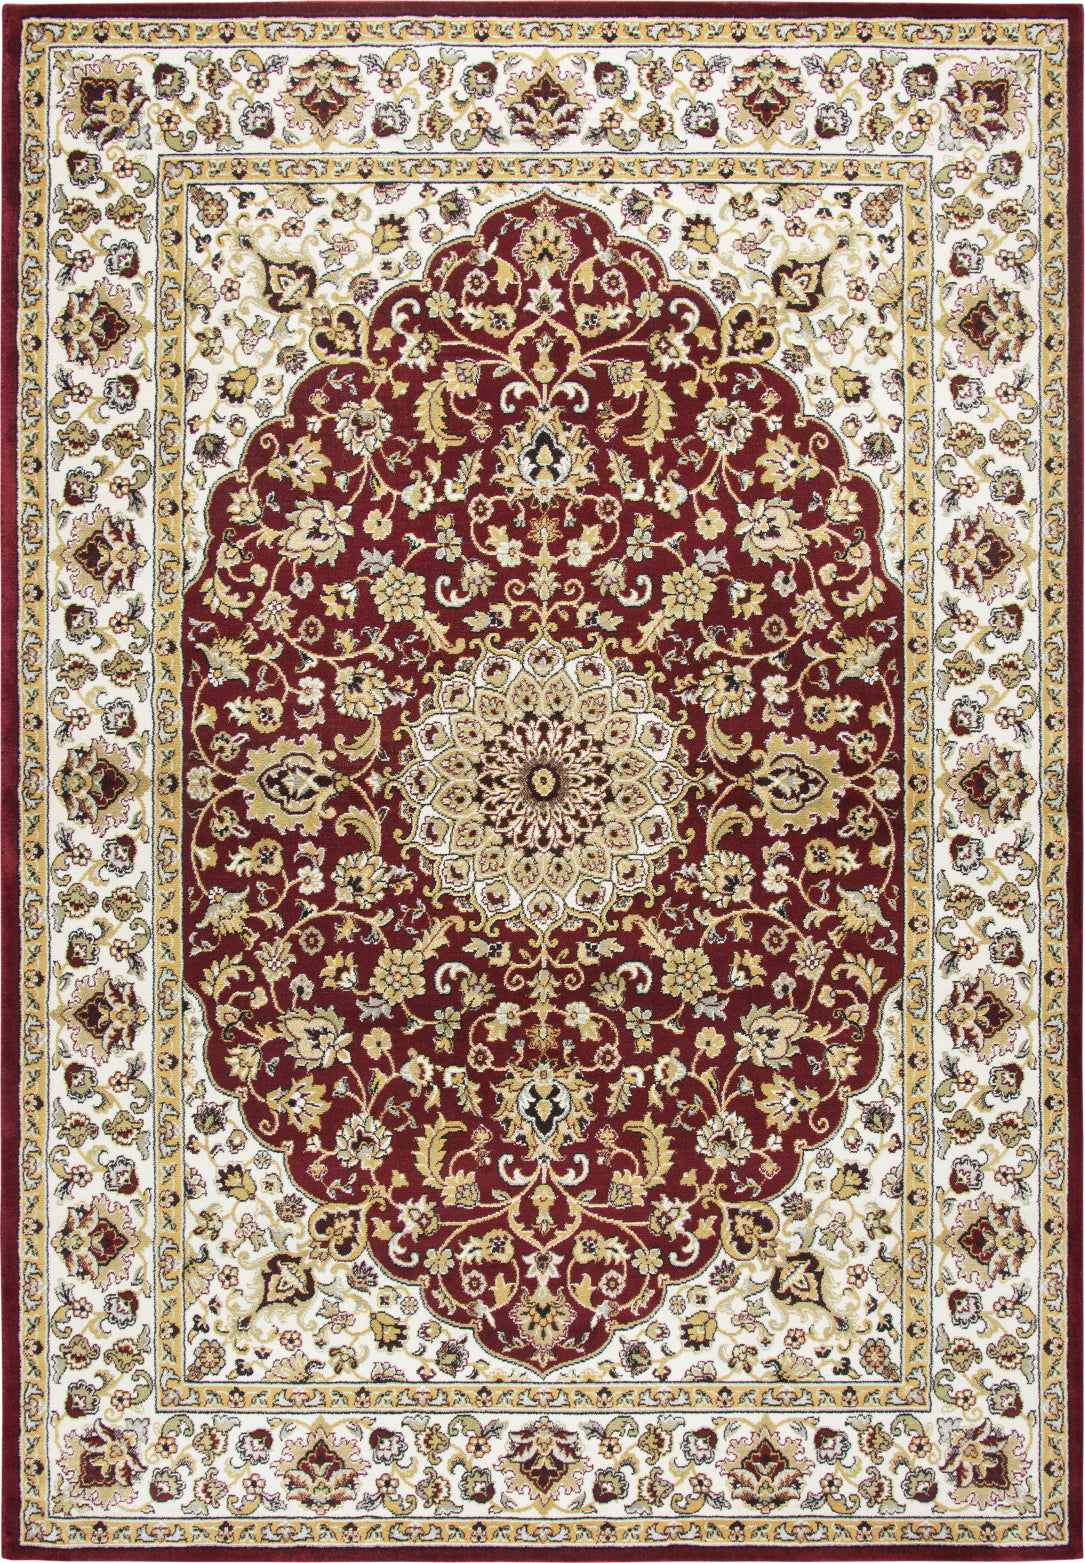 Rizzy Zenith ZH7112 Red Area Rug main image